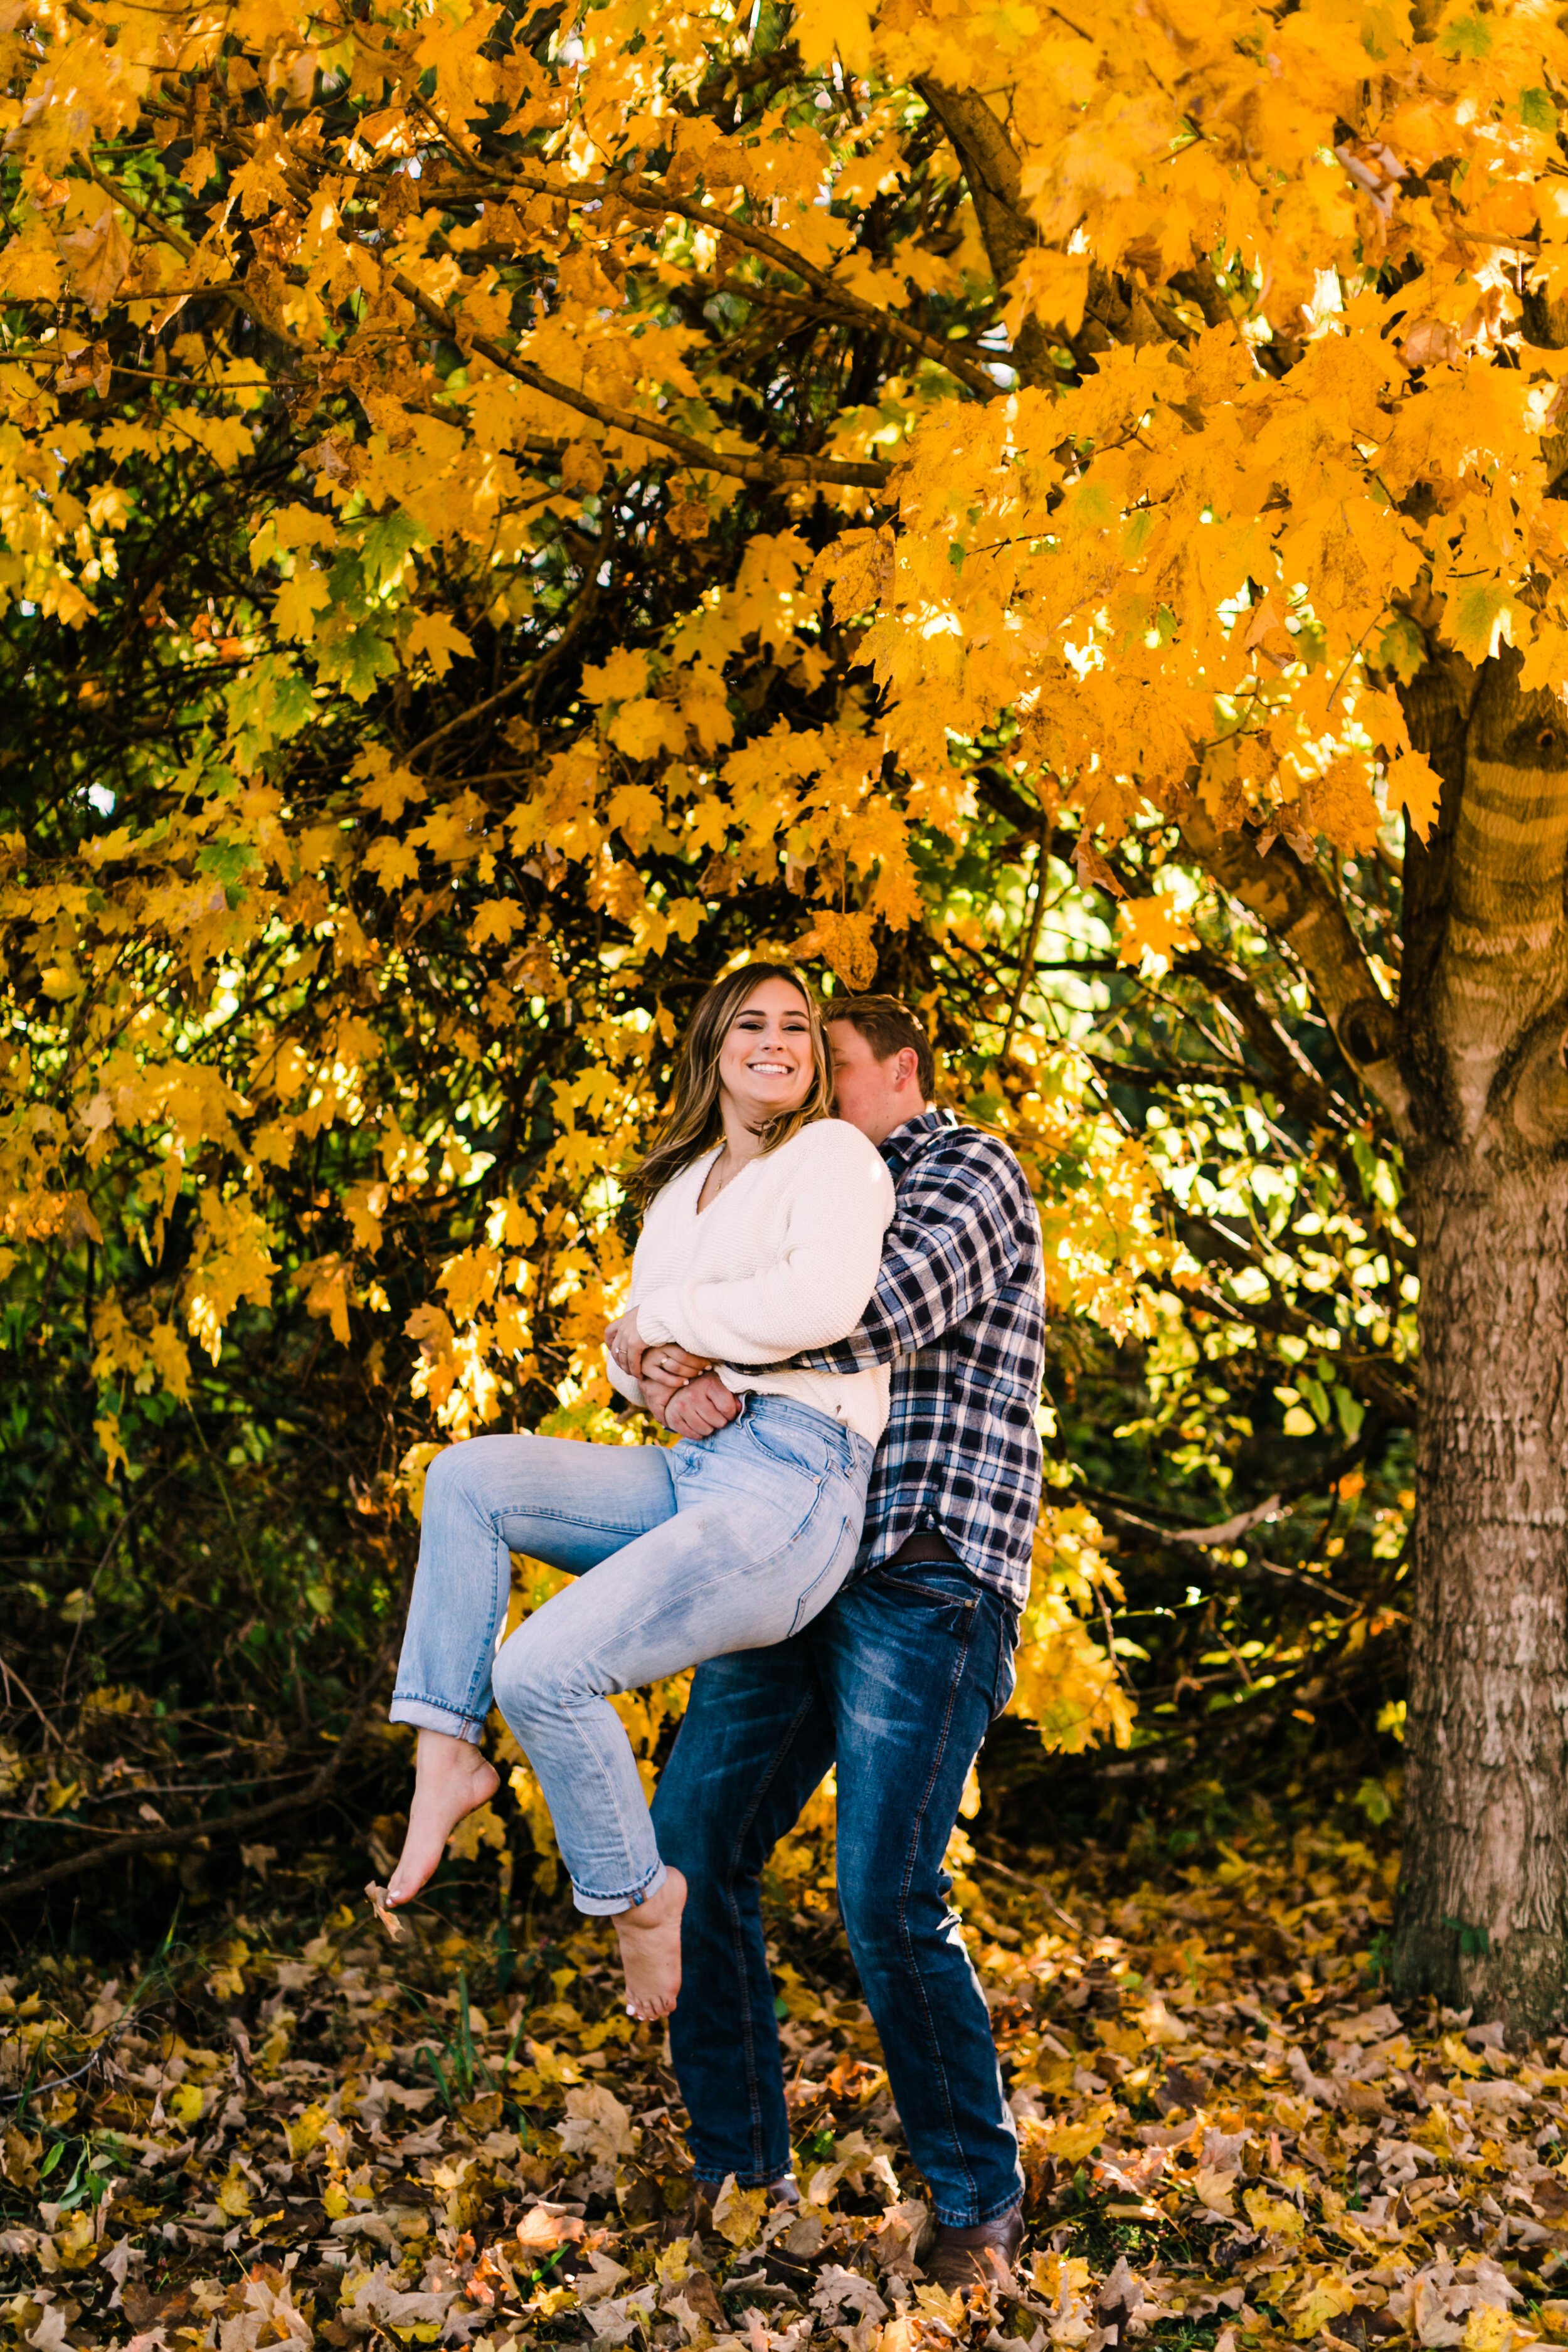 Tennessee+Fall+Engagement+Photos+Puppy (25 of 63).jpg